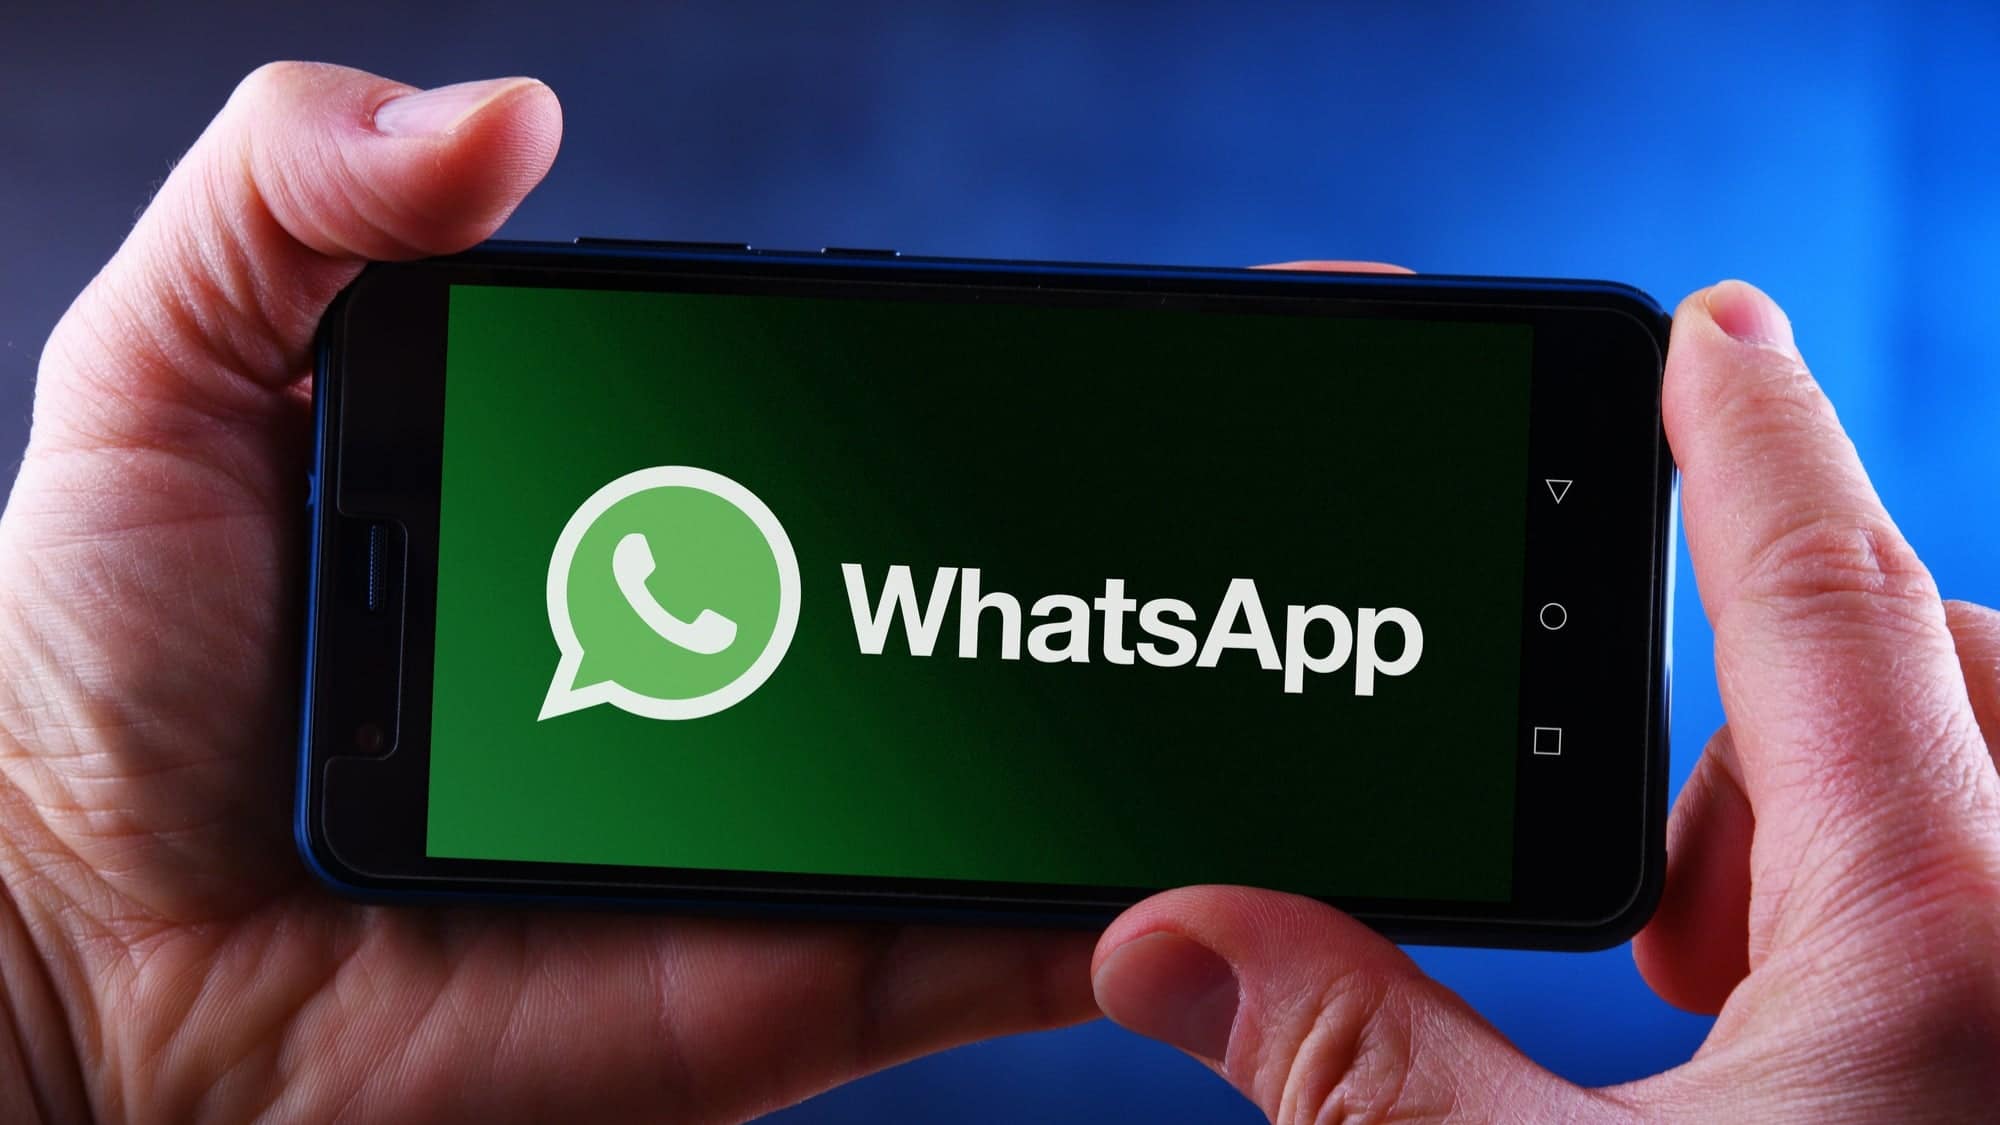 Goodbye WhatsApp.. The Most Powerful and Secure WhatsApp Competitor announces good news for users and millions of them 1 8/10/2021 - 6:33 PM